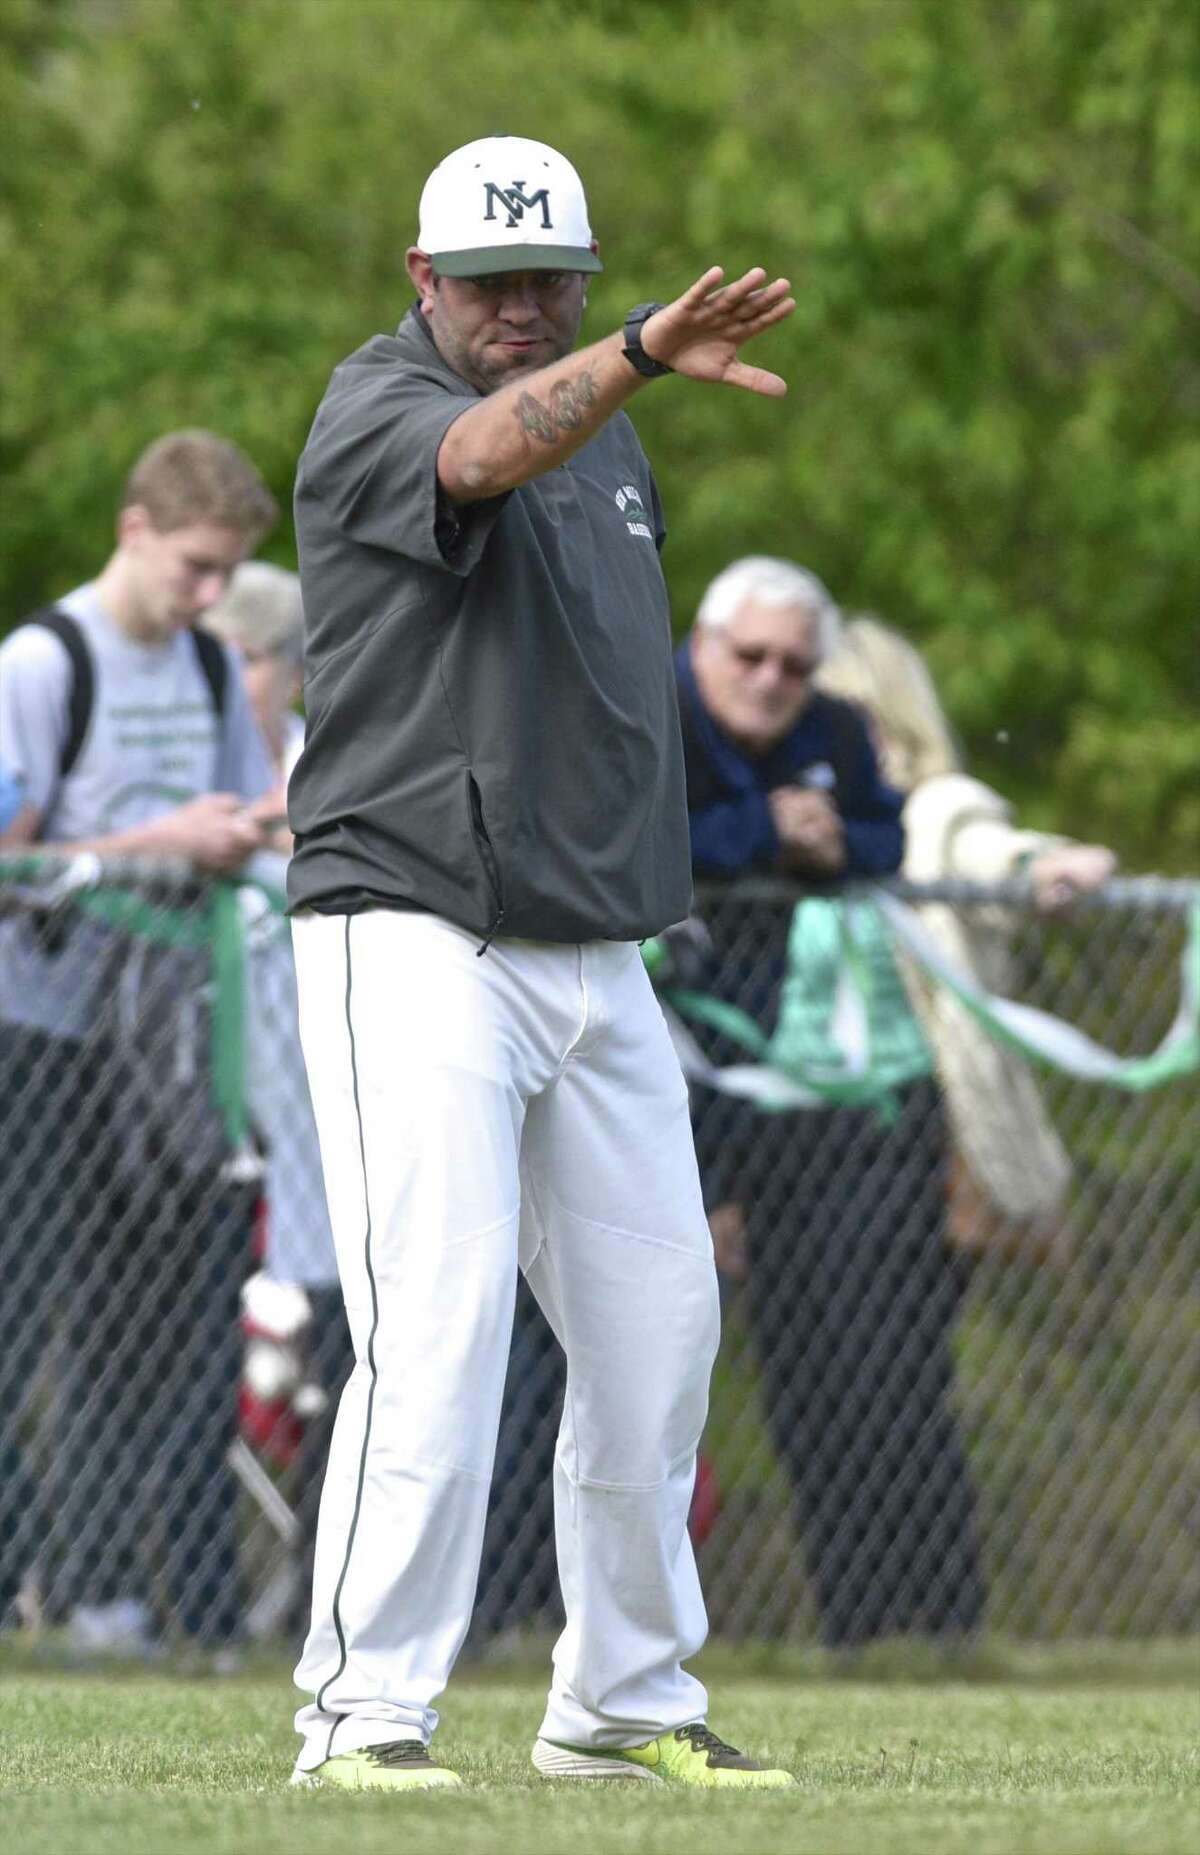 New Milford head coach Ryan Johnson during the boys baseball game between Weston and New Milford high schools. Wednesday afternoon, May 10, 2017, at New Milford High School, in New Milford, Conn.